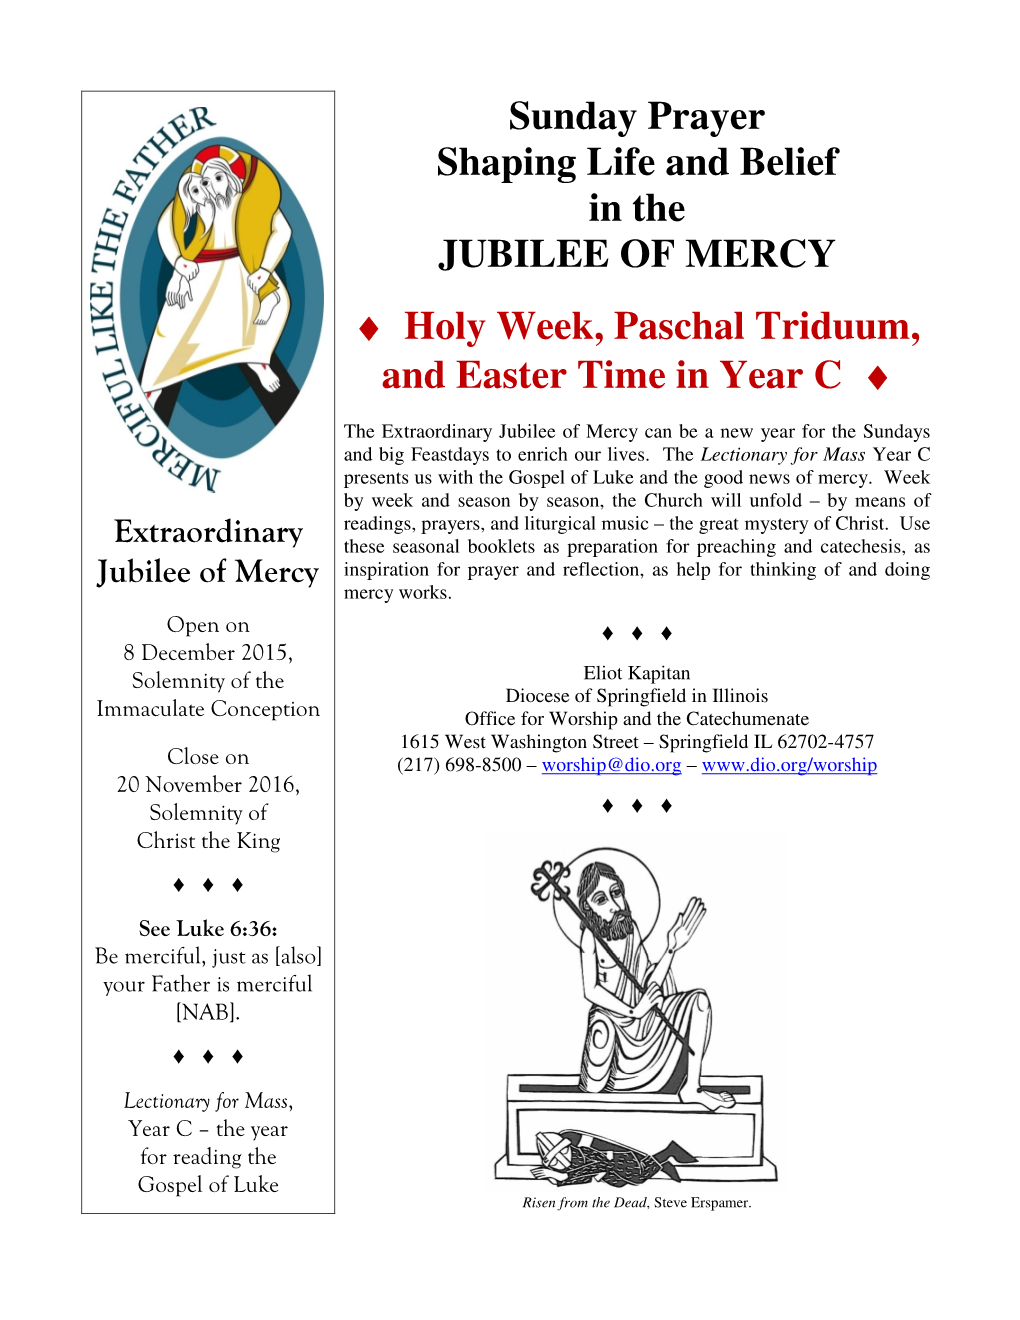 Holy Week, Paschal Triduum, and Easter Time in Year C ♦